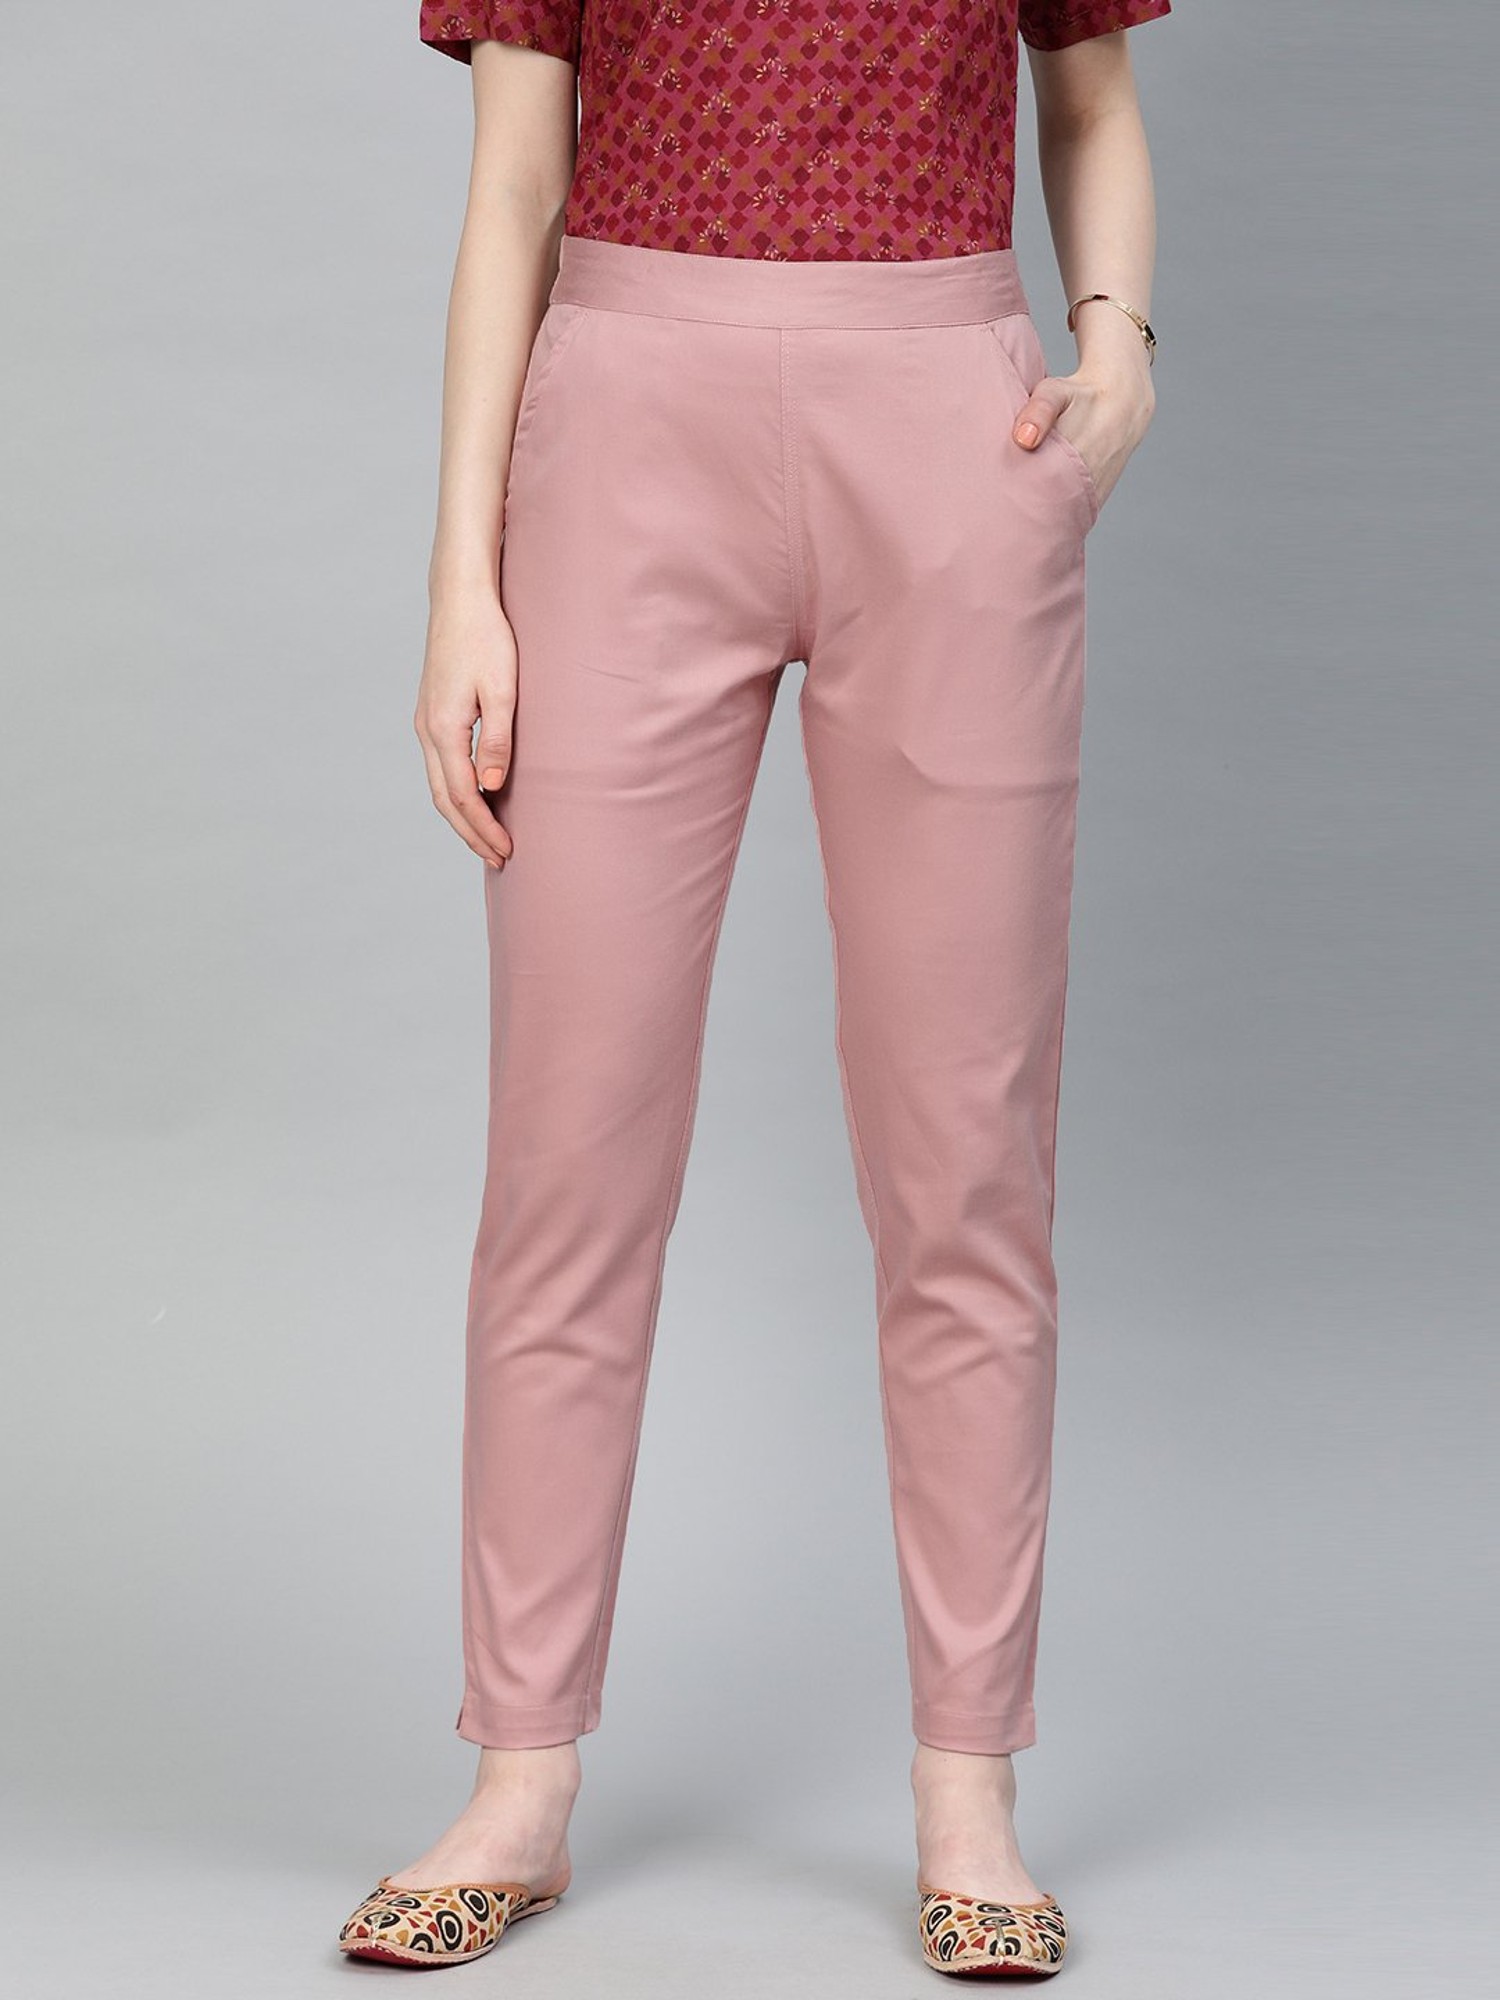 Solid Color Art Silk Pant in Baby Pink  BJG19